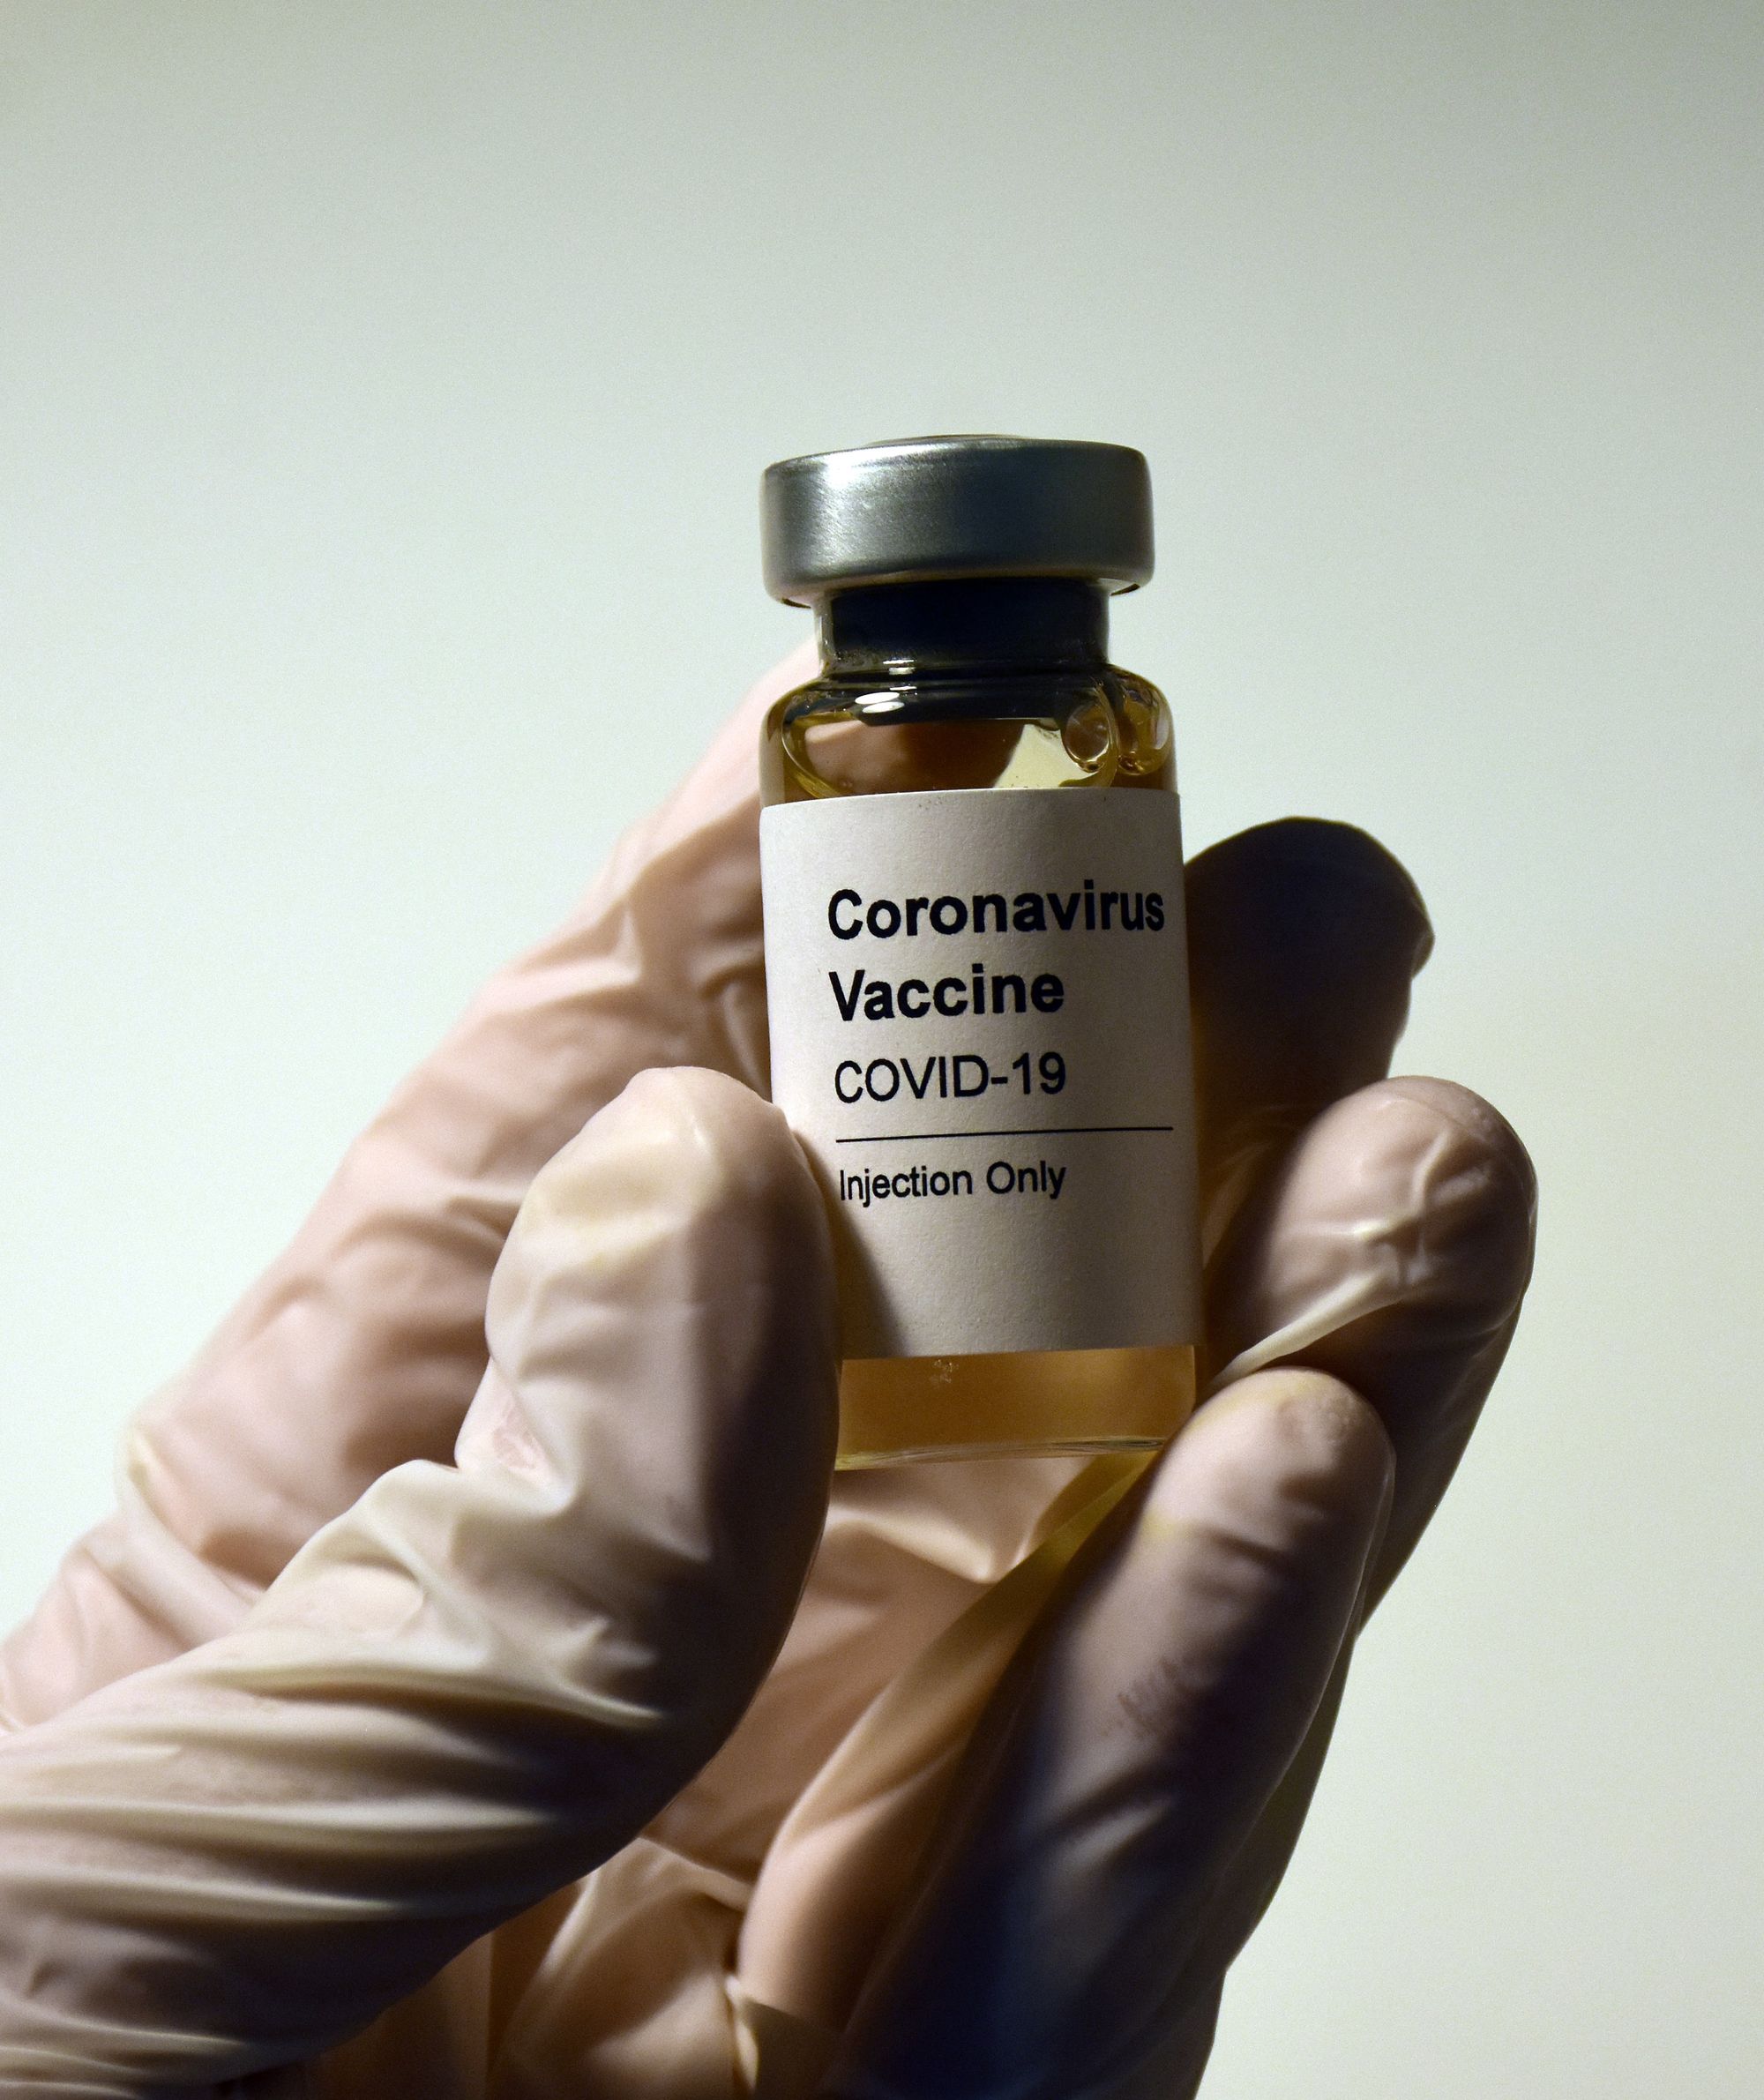 United States: vaccination requirements and verification programs split state governments